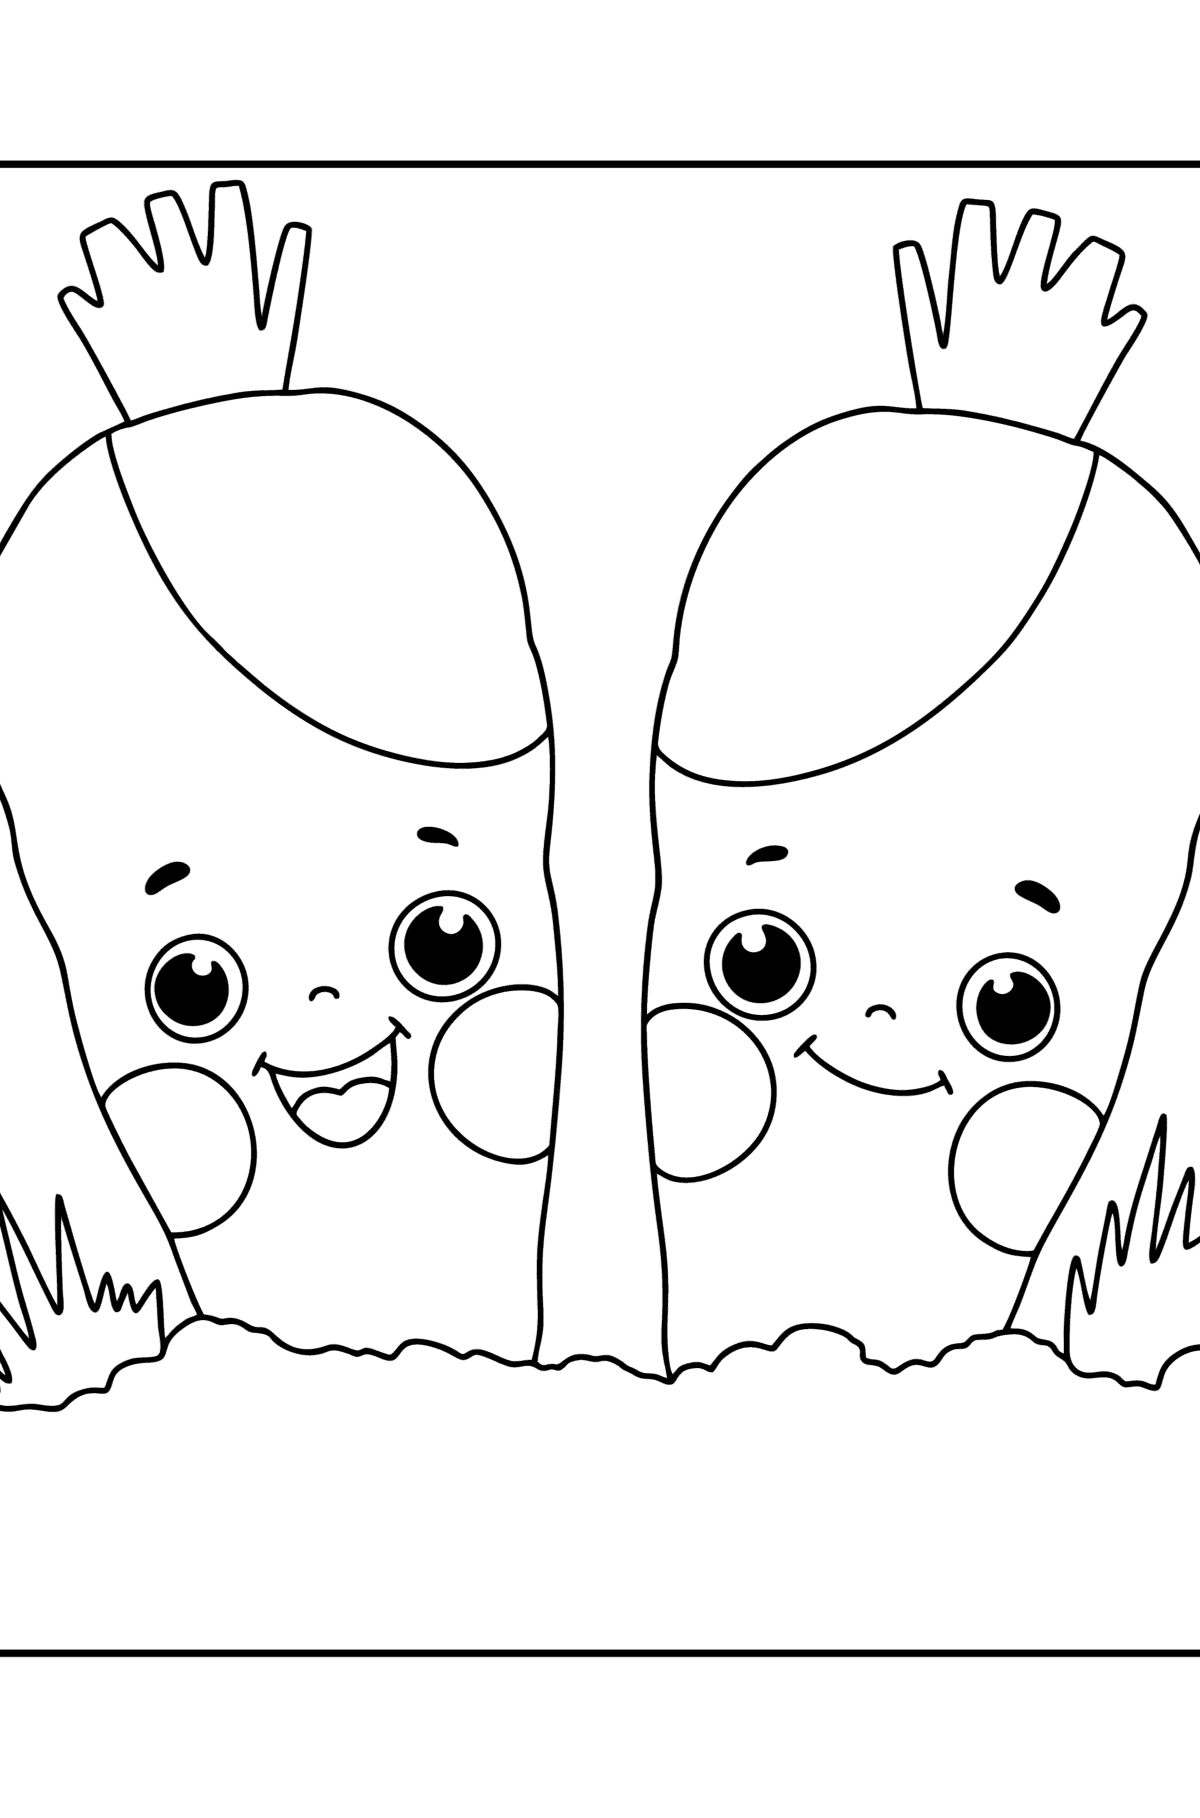 Kawaii Carrots сolouring page - Coloring Pages for Kids